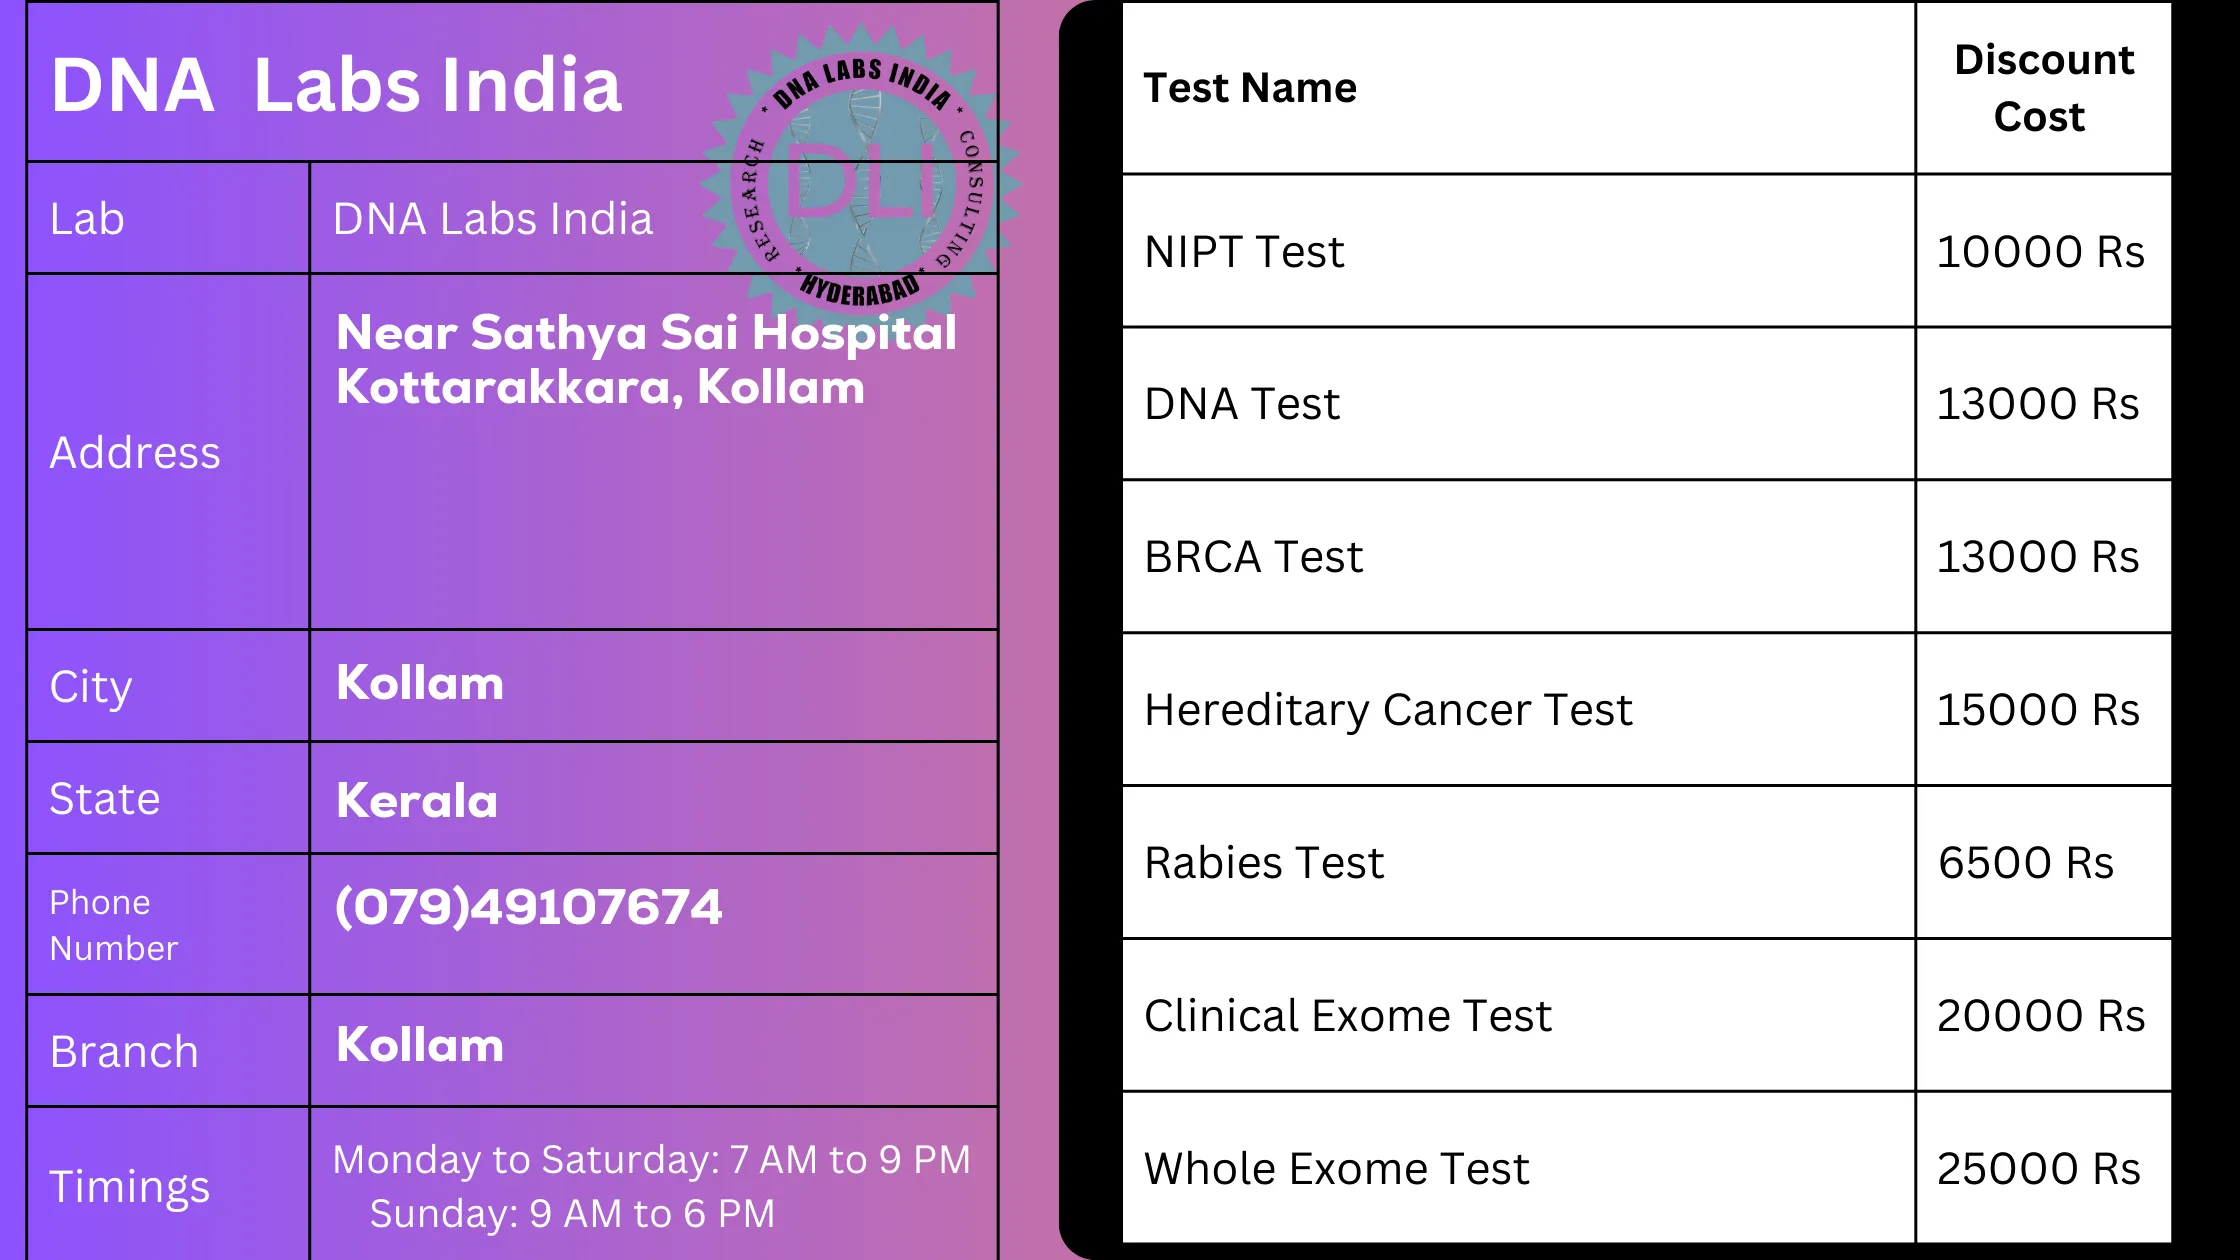 DNA Labs India - Genetic Testing Services in Kollam